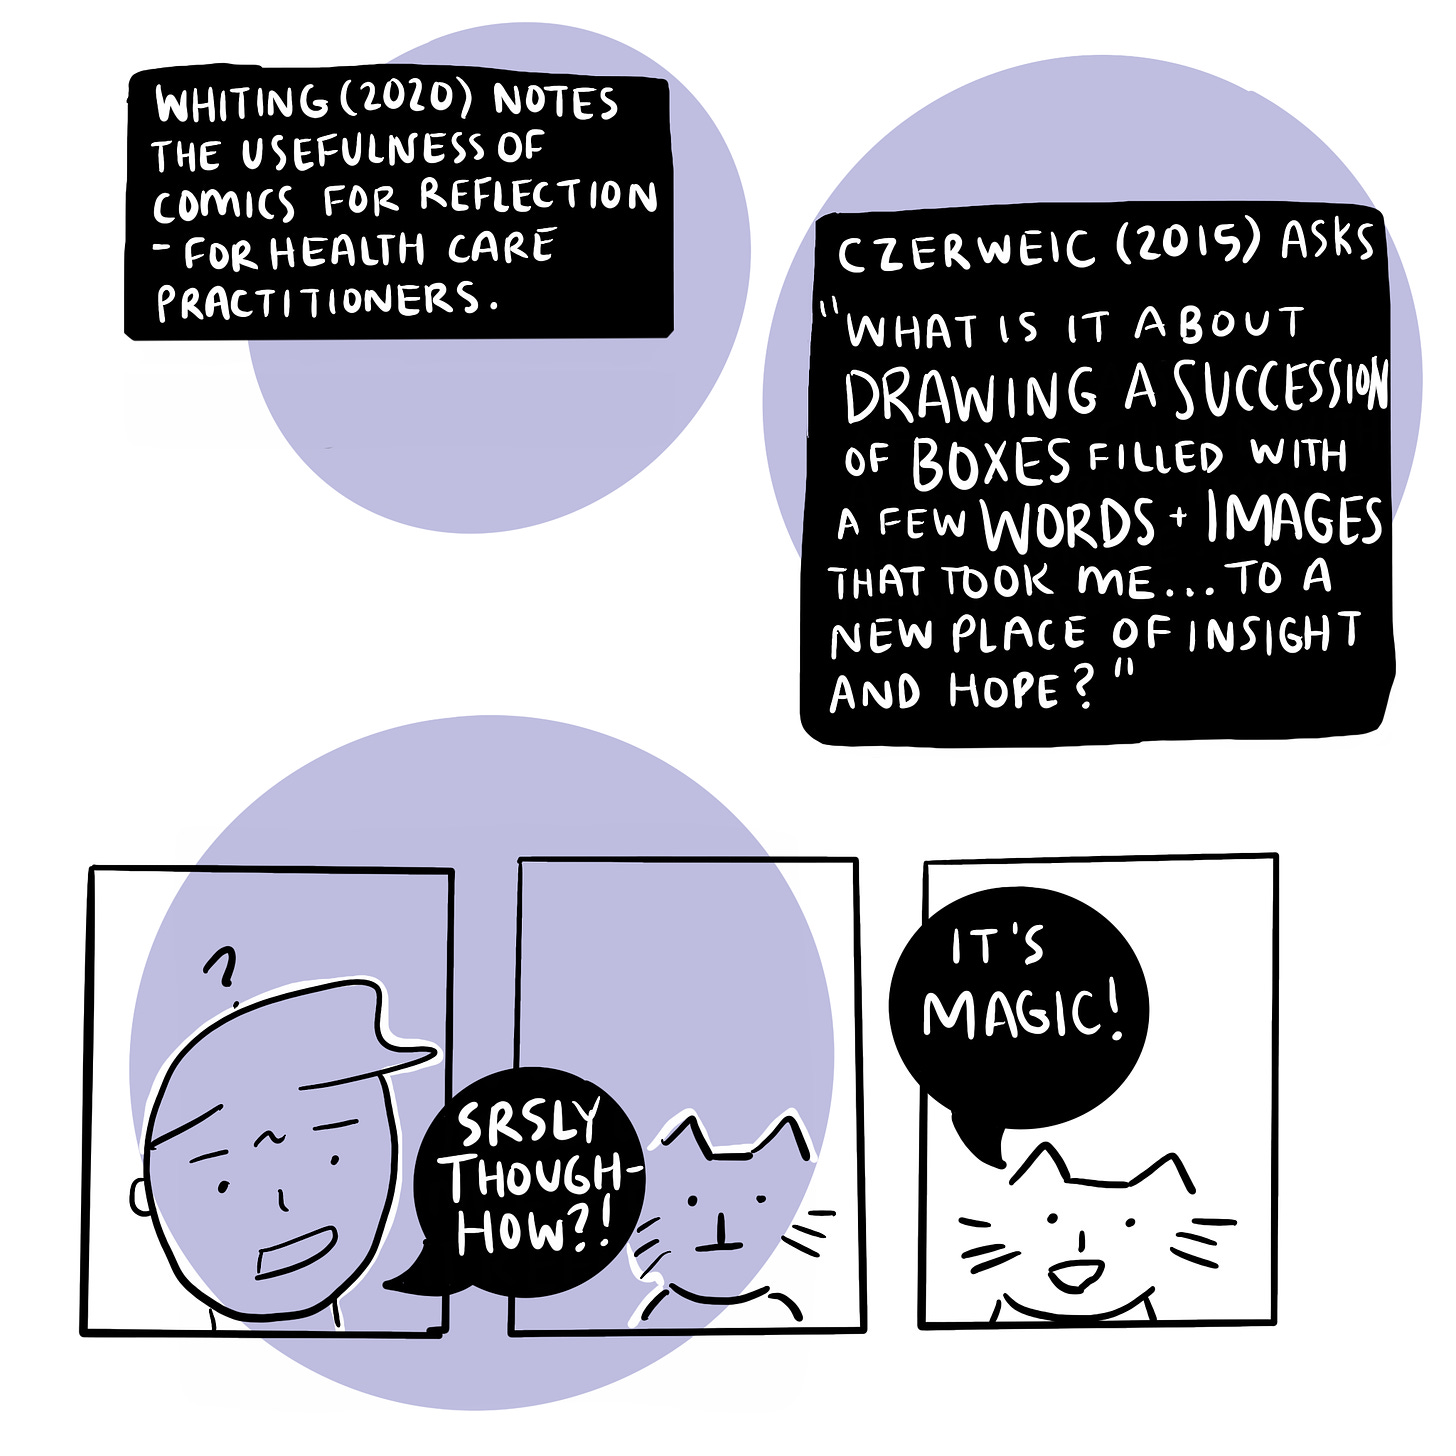 Whiting (2020) notes the usefulness of comics for reflection for health care practitioners. Czerweic (2015) asks “what is it about drawing a succession of boxes filled with a few words and images that took me…to a new place of insight and hope?” Image of three panels, first me saying “srsly though-how?” and then a cat staring, and then the third panel is the cat smiling and saying “it’s magic!”